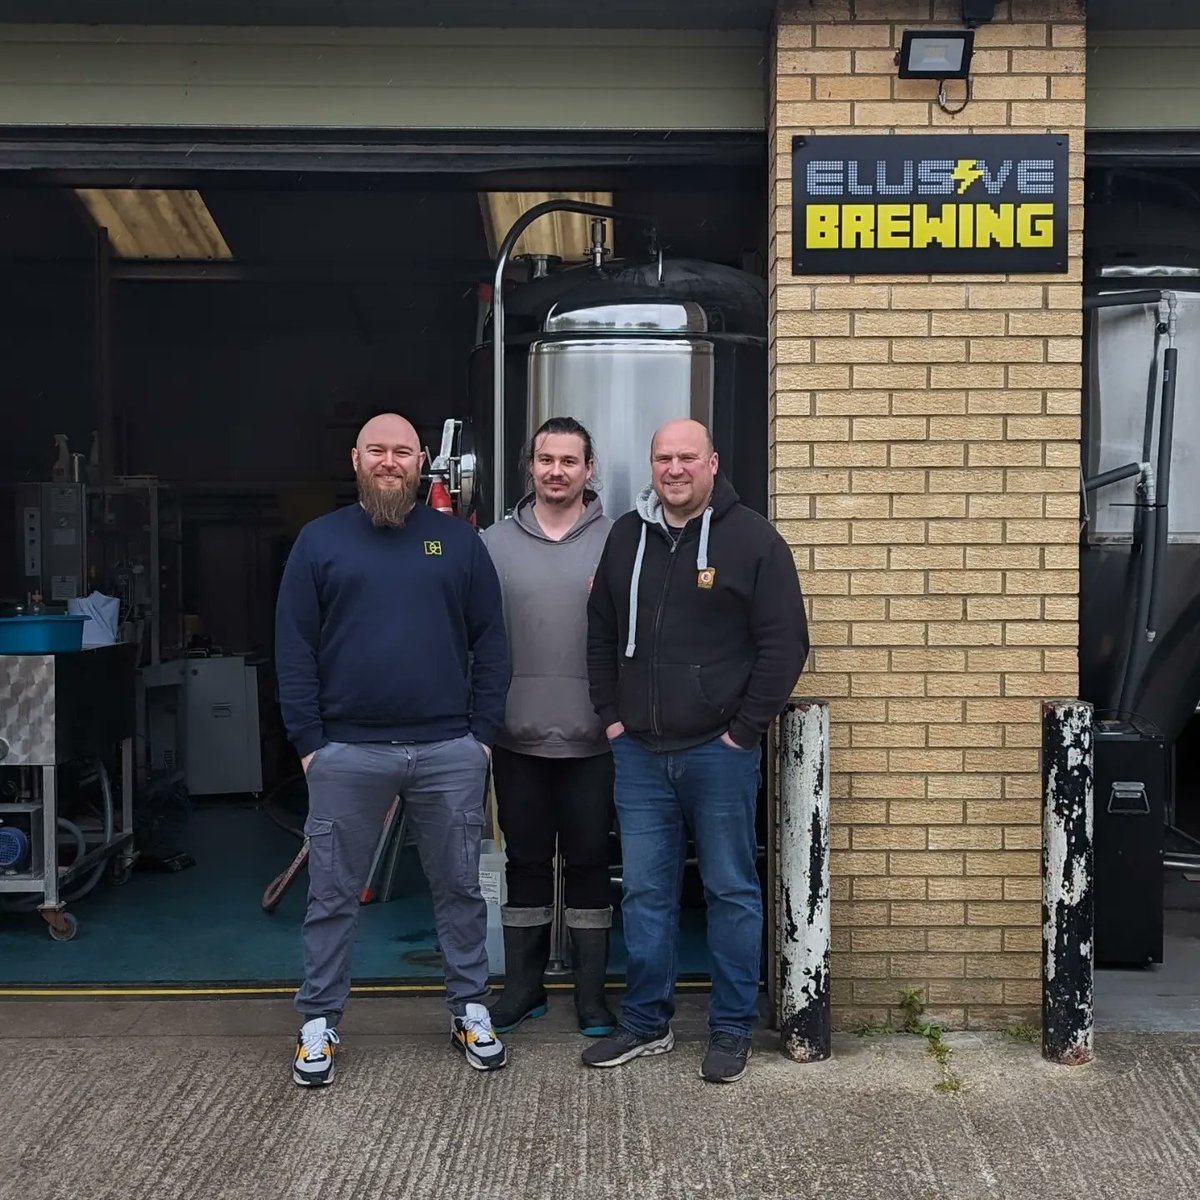 A friend with yeast is a friend indeed. Or so the saying goes, or something like that. The @DBBrewery team has been a huge part of the Elusive story; always helping us out & having a good time along the way. It was great to have Mike join us to brew one of our birthday* beers